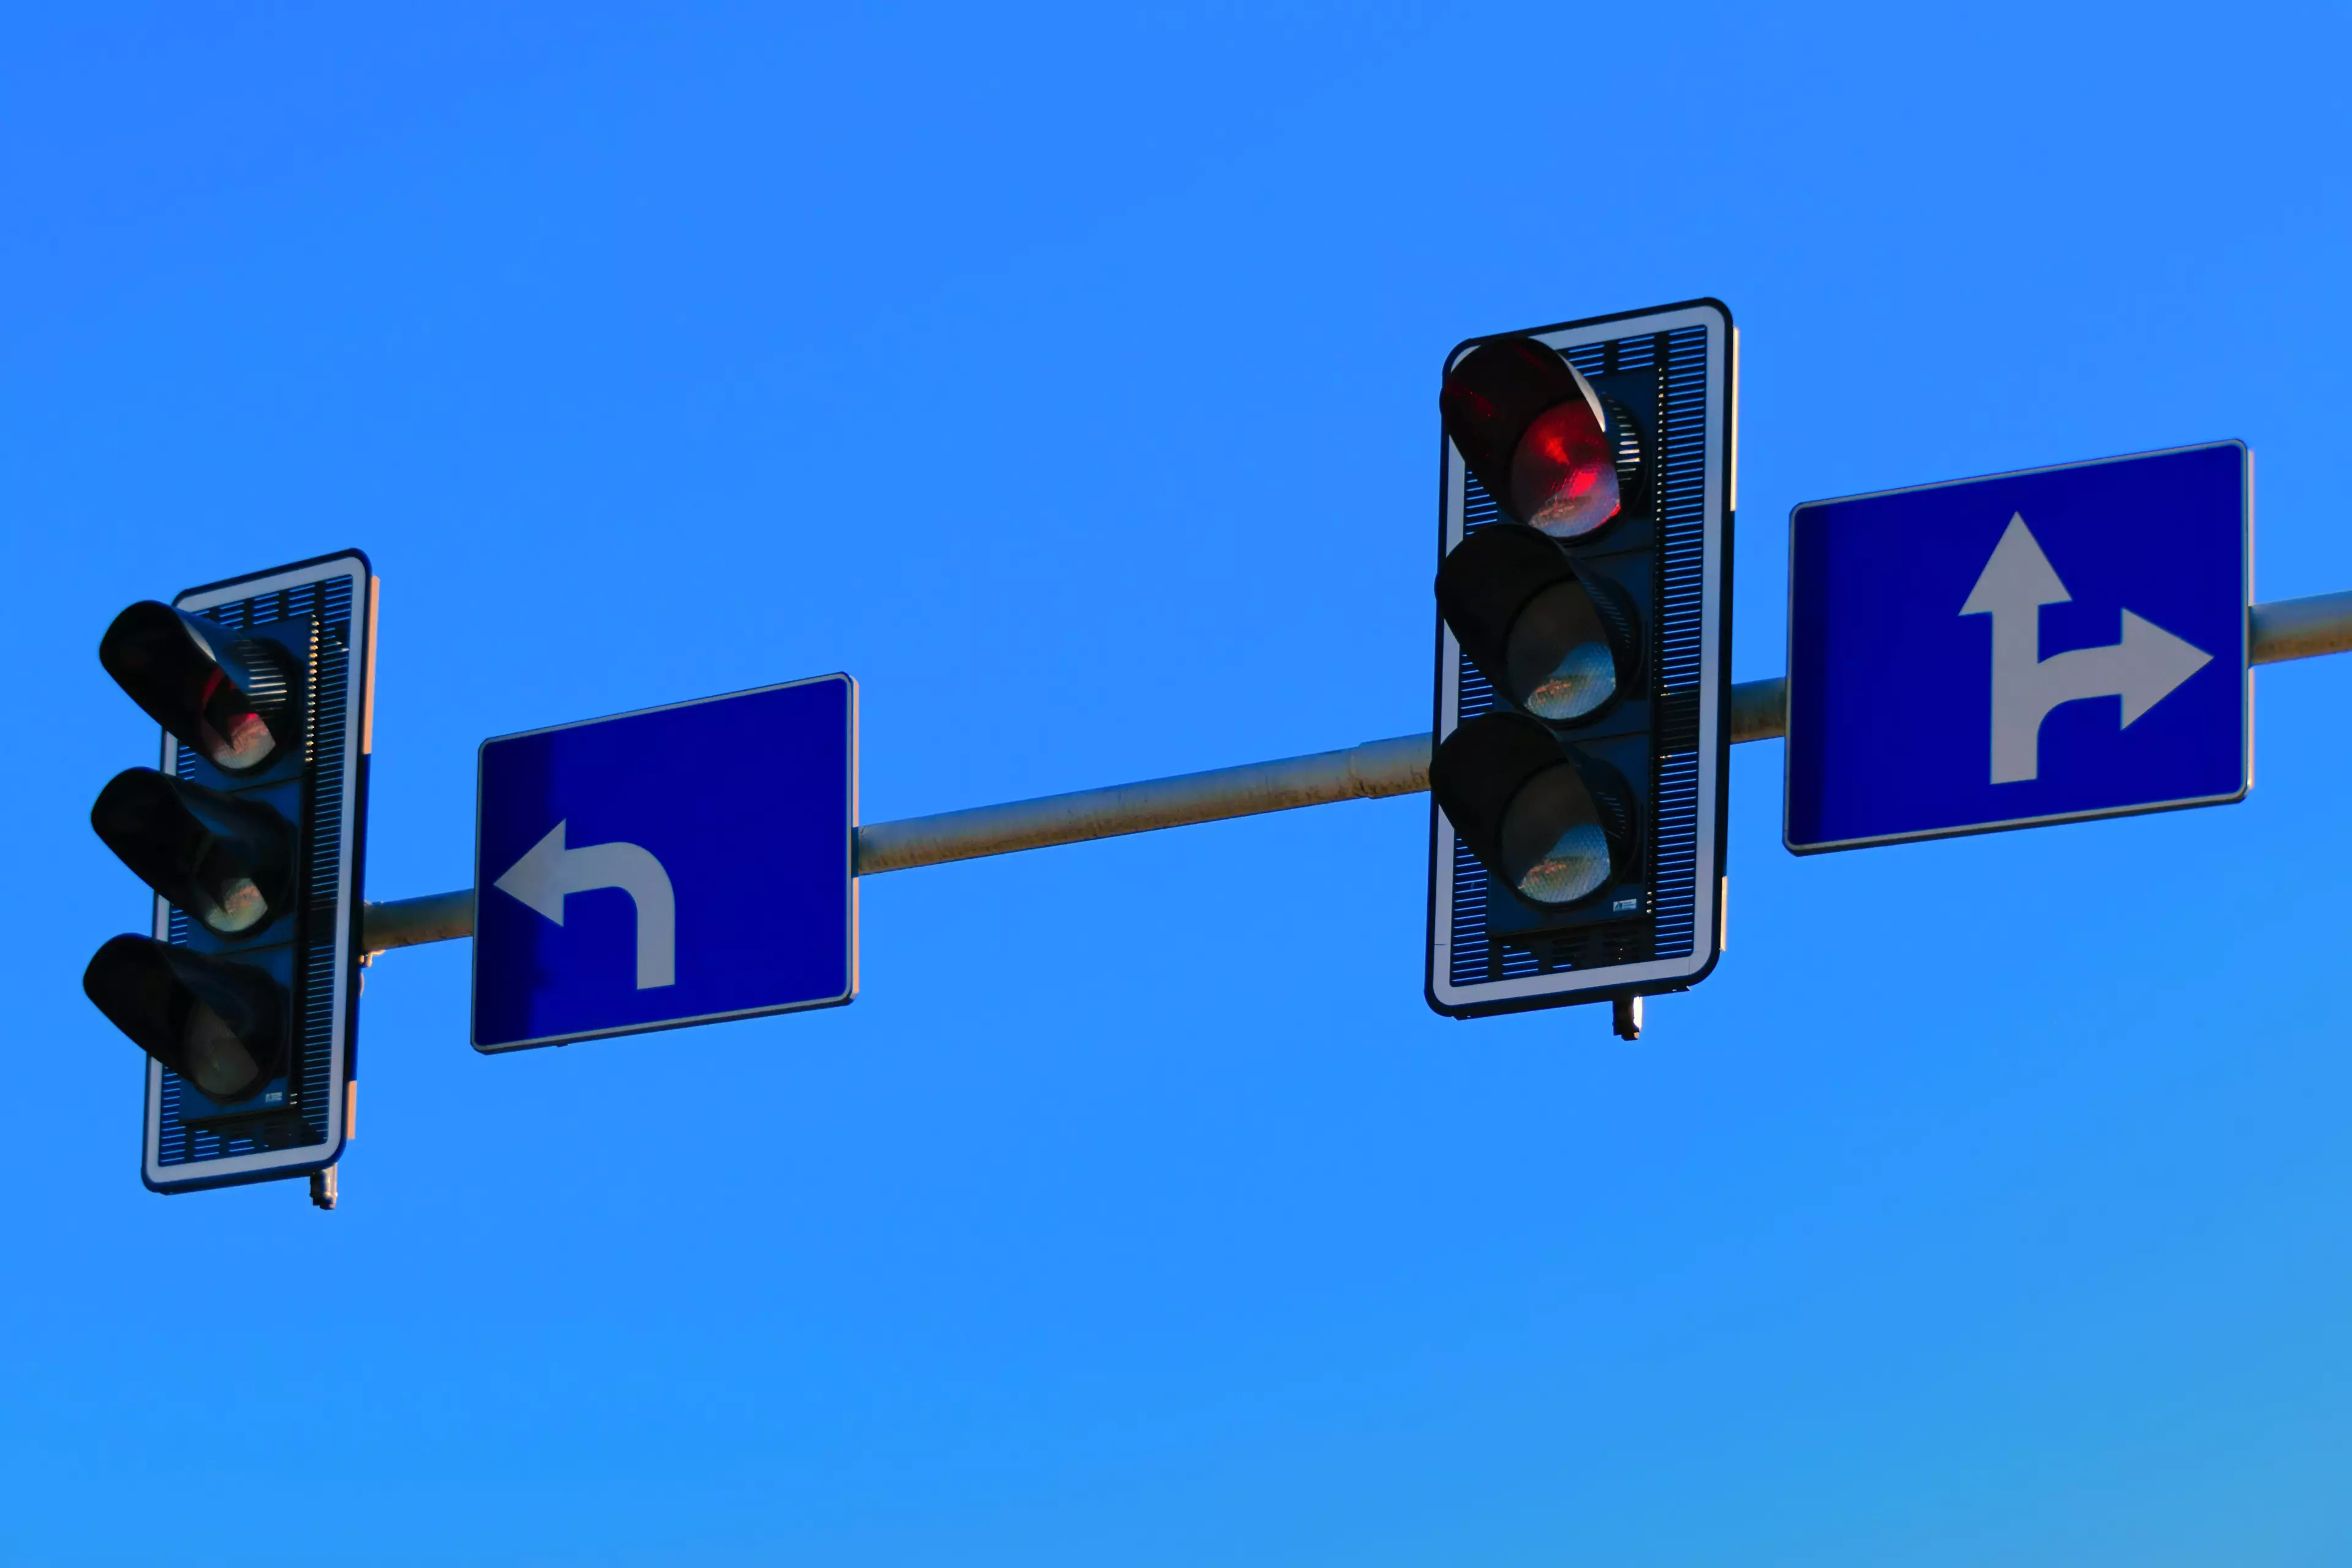 The pair apparently locked eyes at a set of traffic lights (stock image).